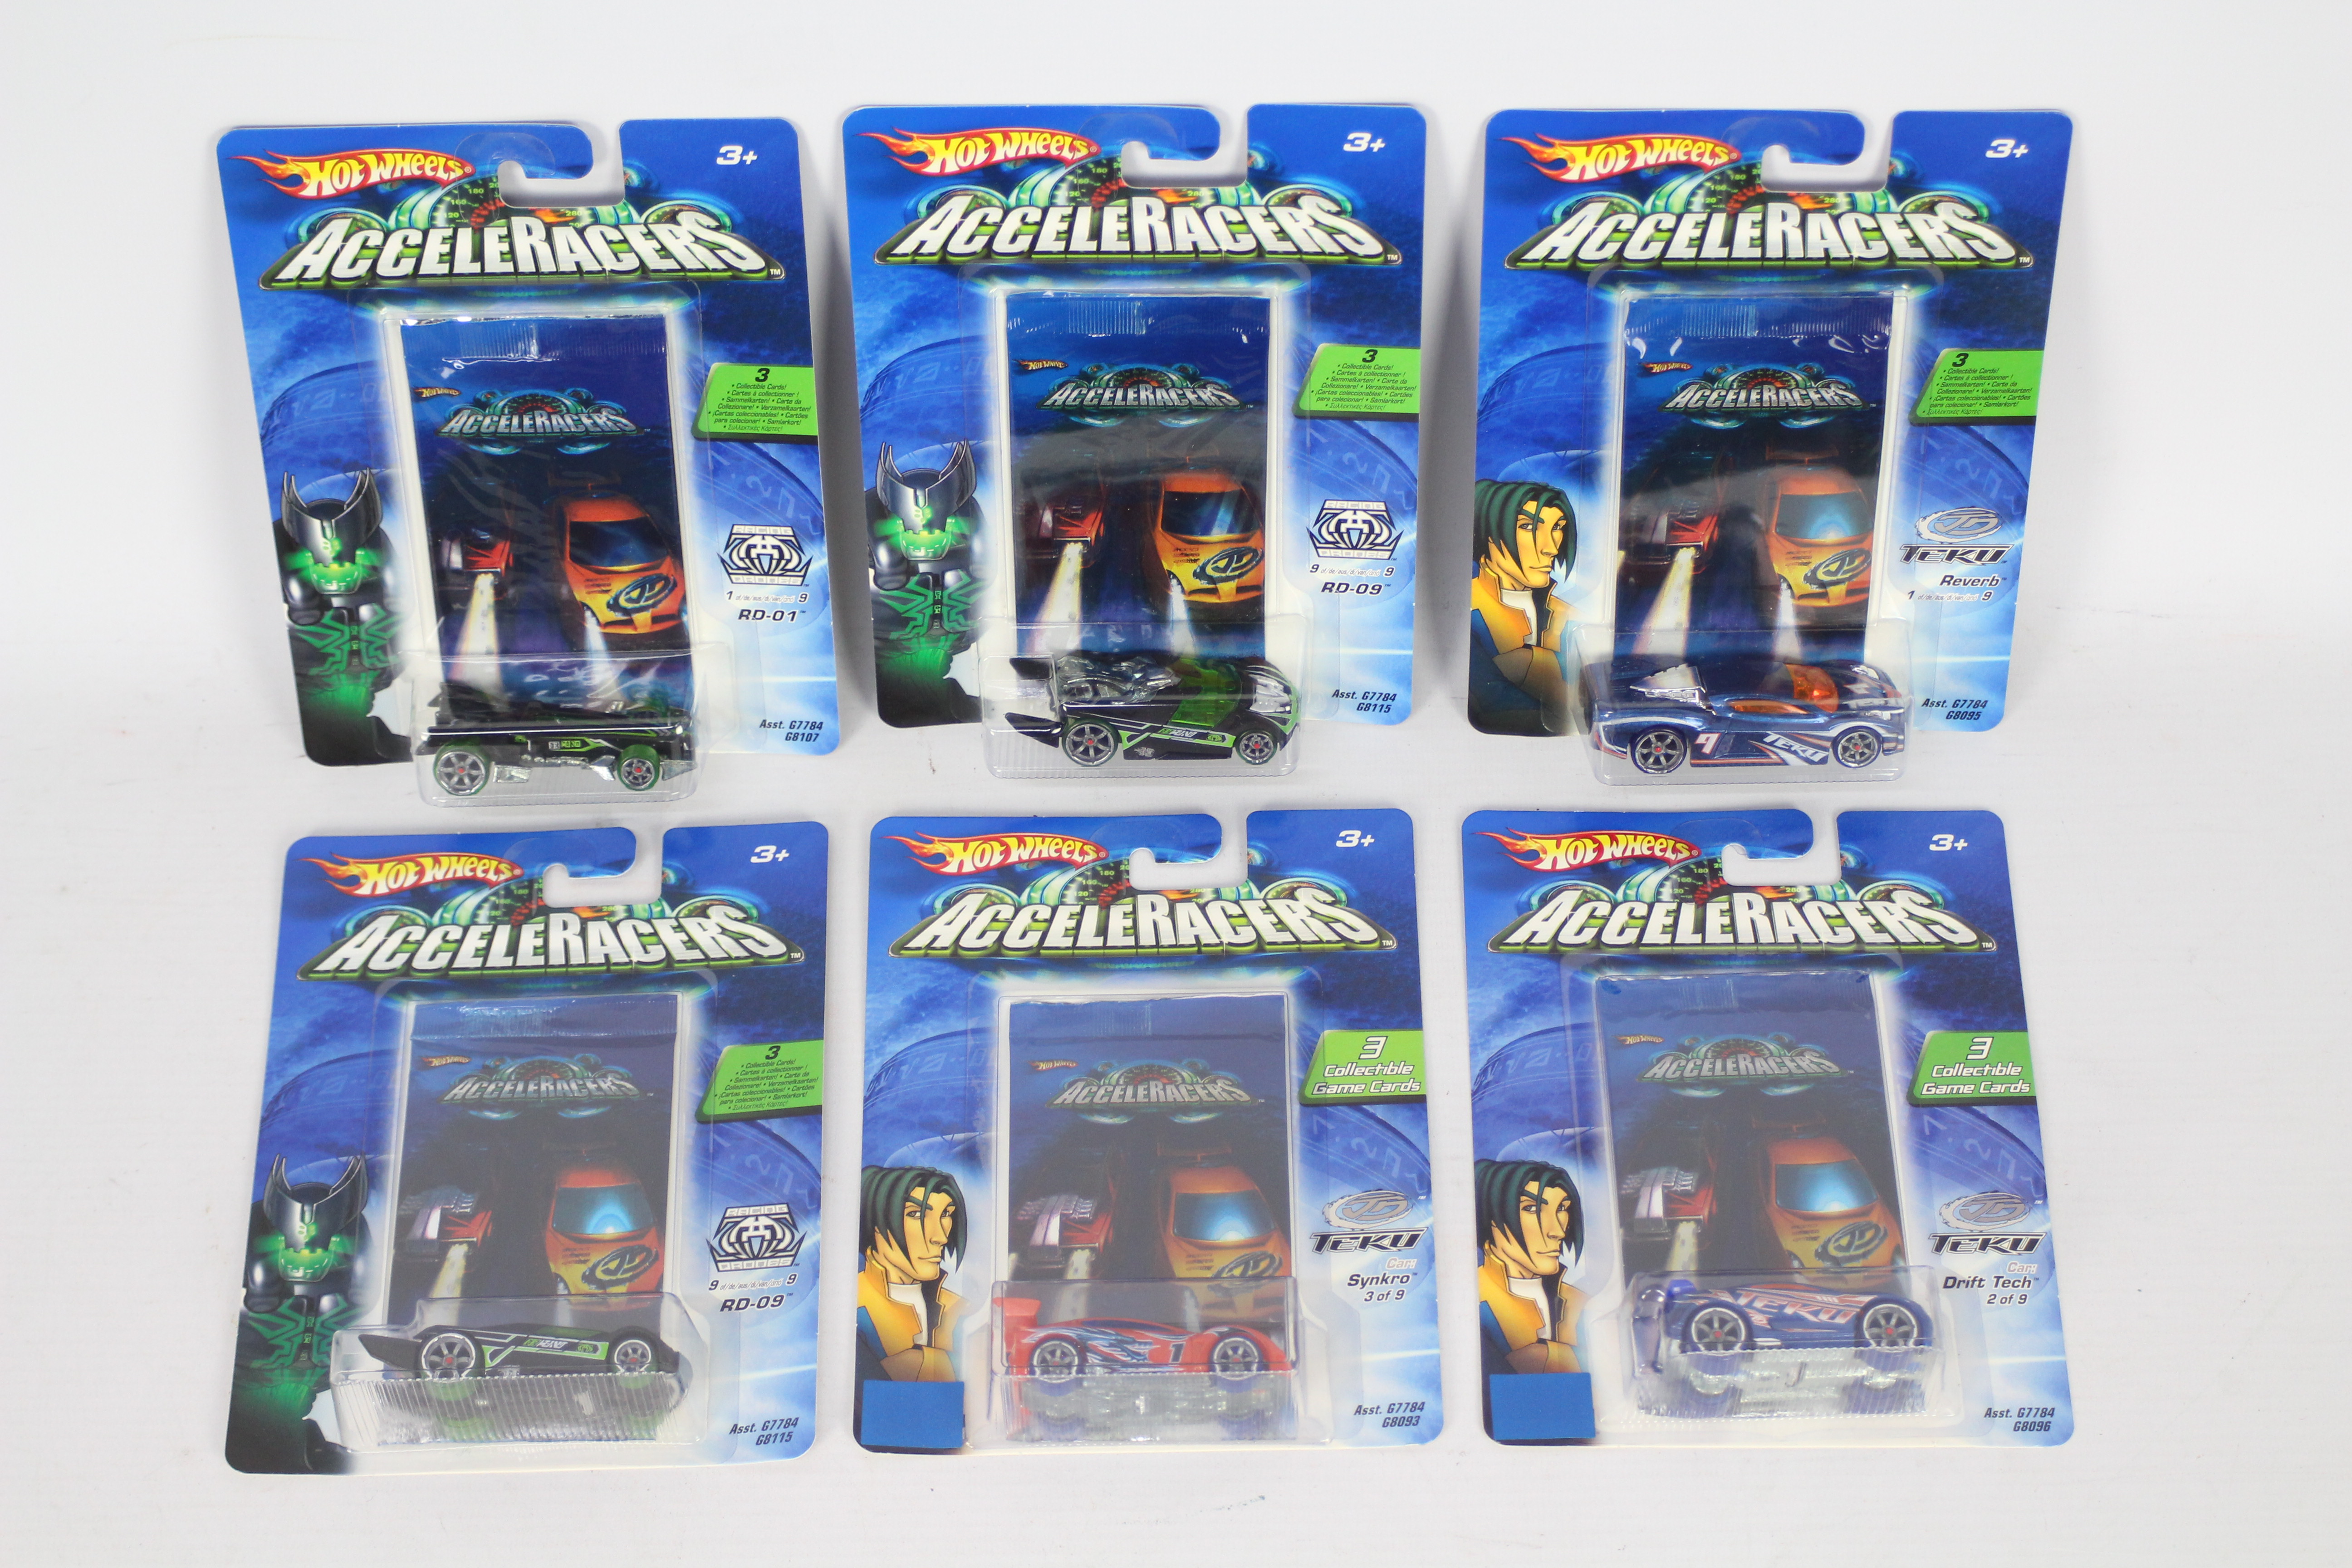 Hot Wheels - Acceleracers - 6 x unopened carded Acceleracers models from the Teku and Racing Drones